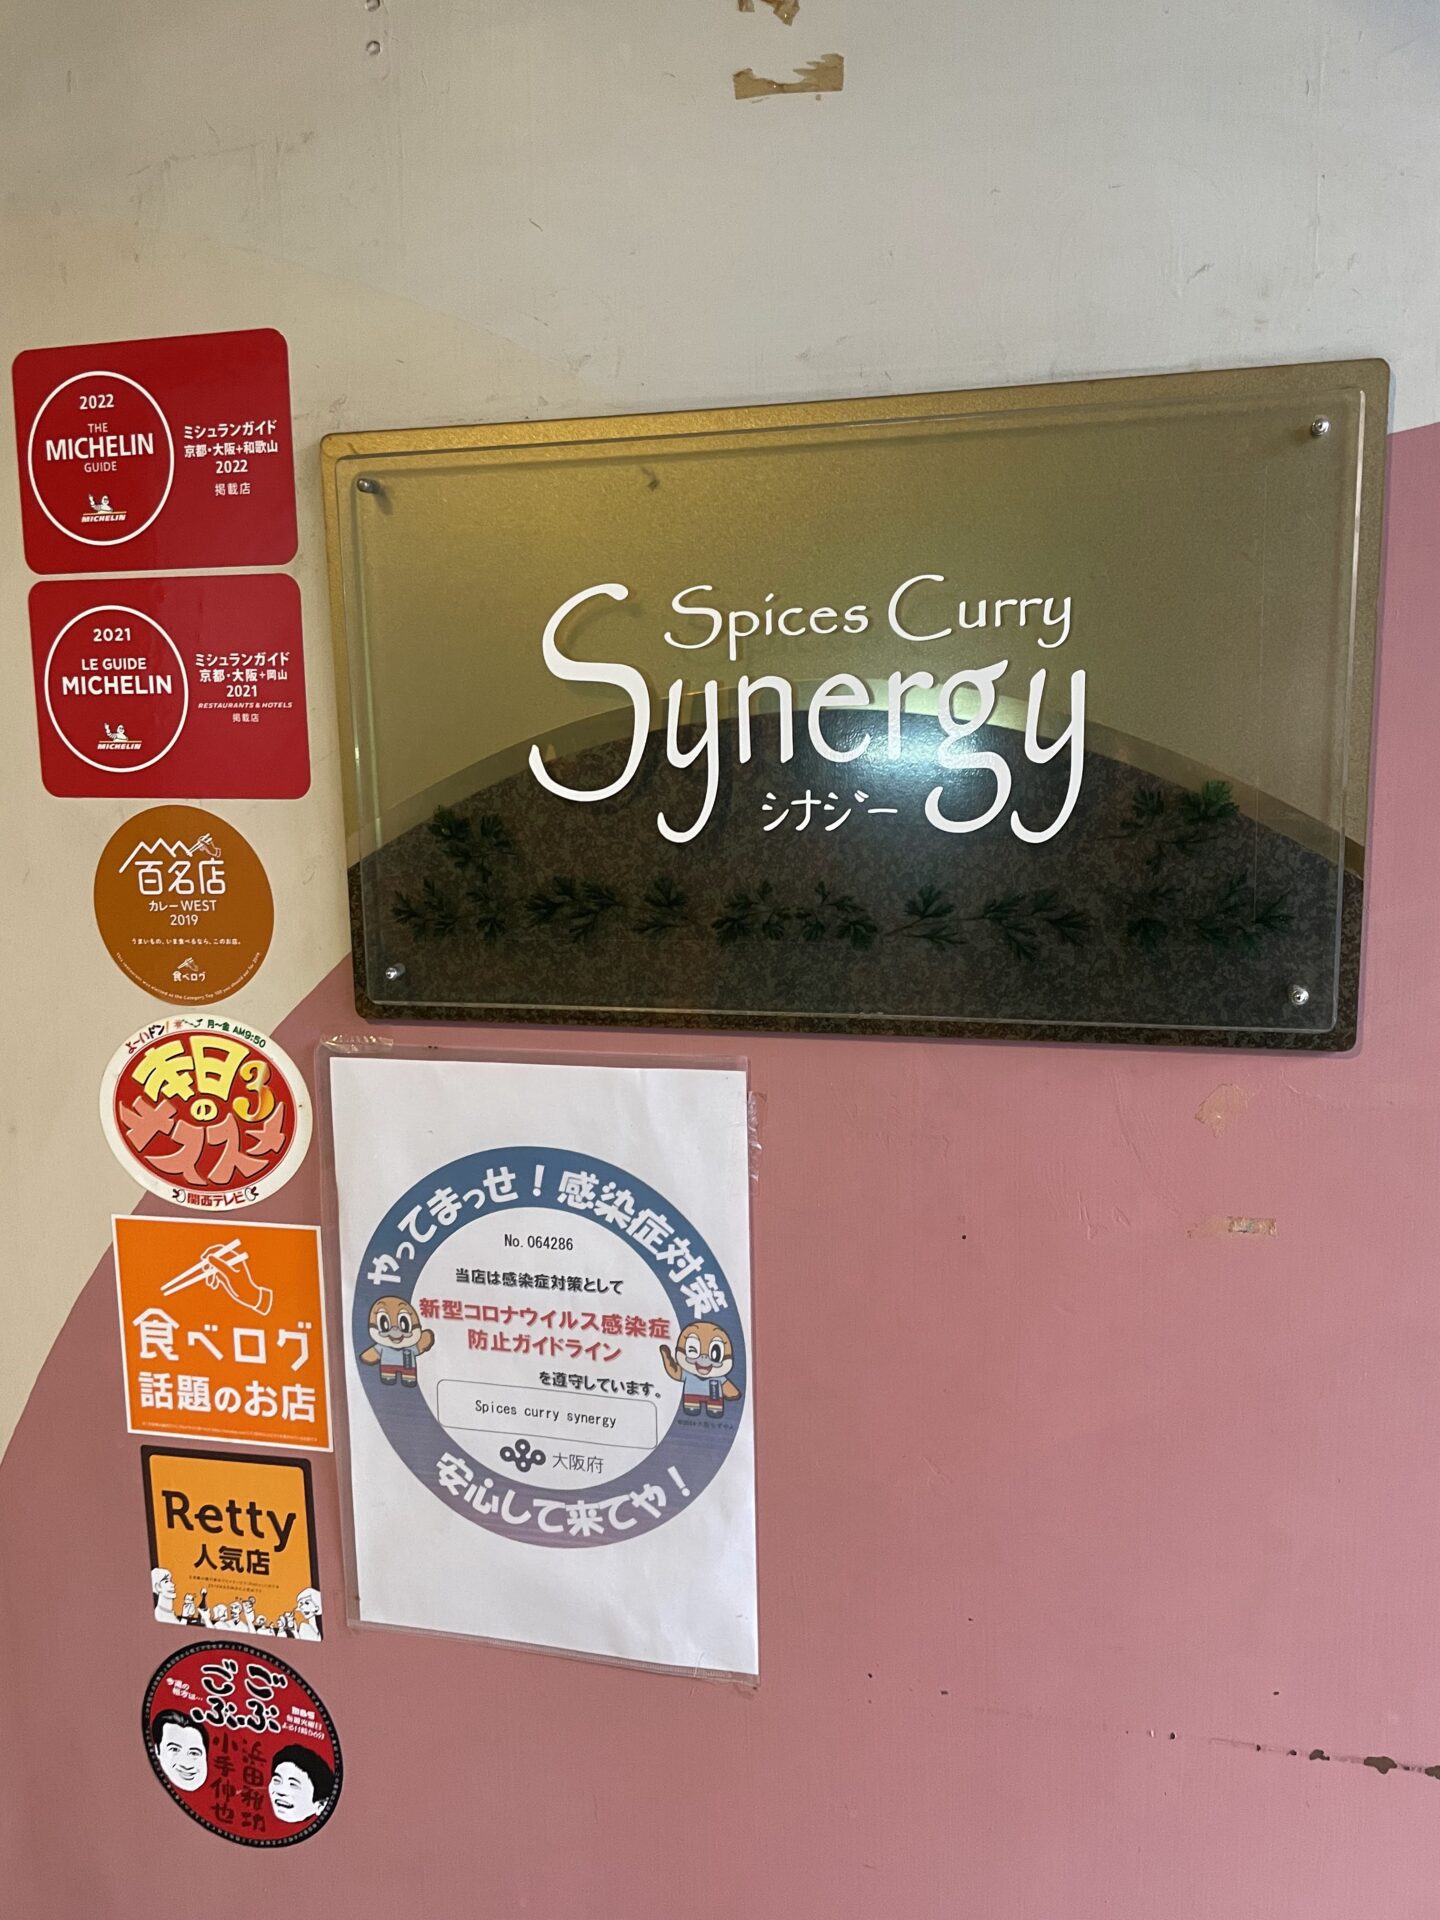 spices curry Synergy/シナジー
評判いい